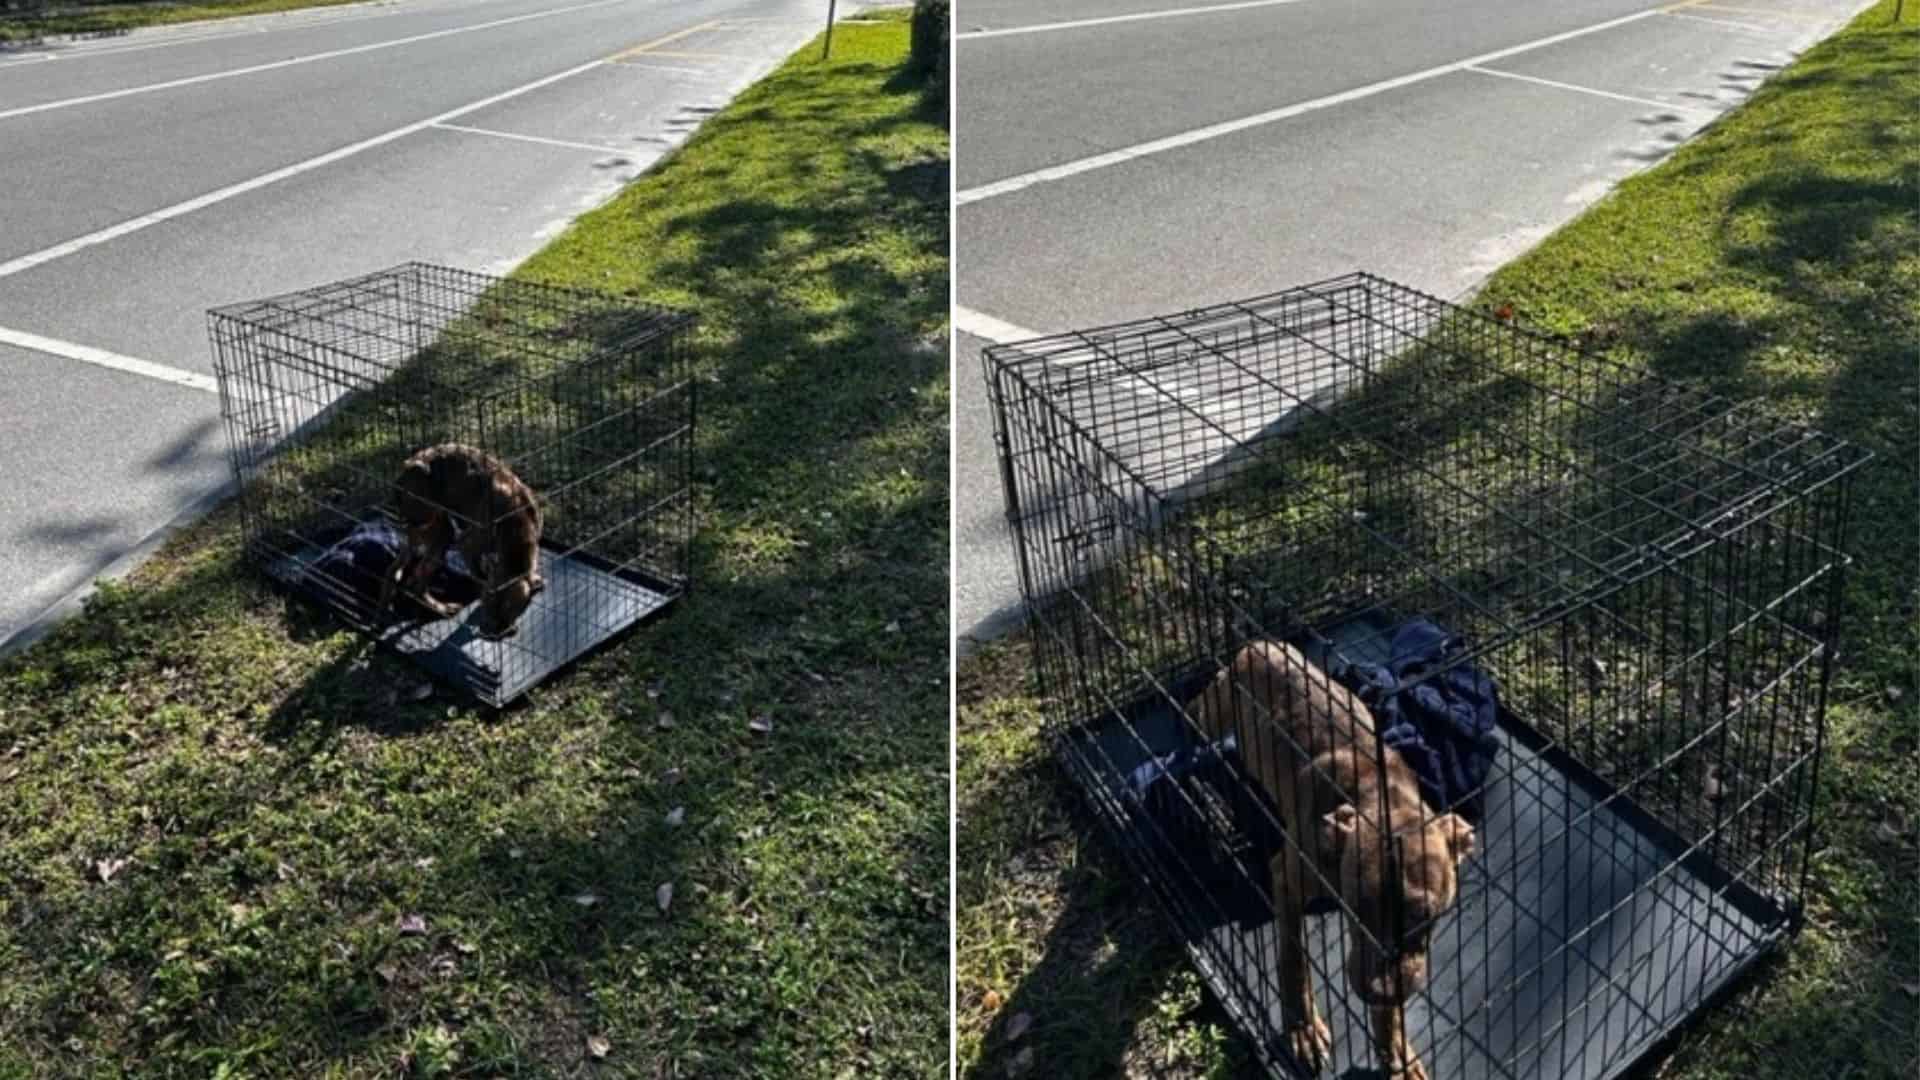 dog abandoned in a cage next to a busy road